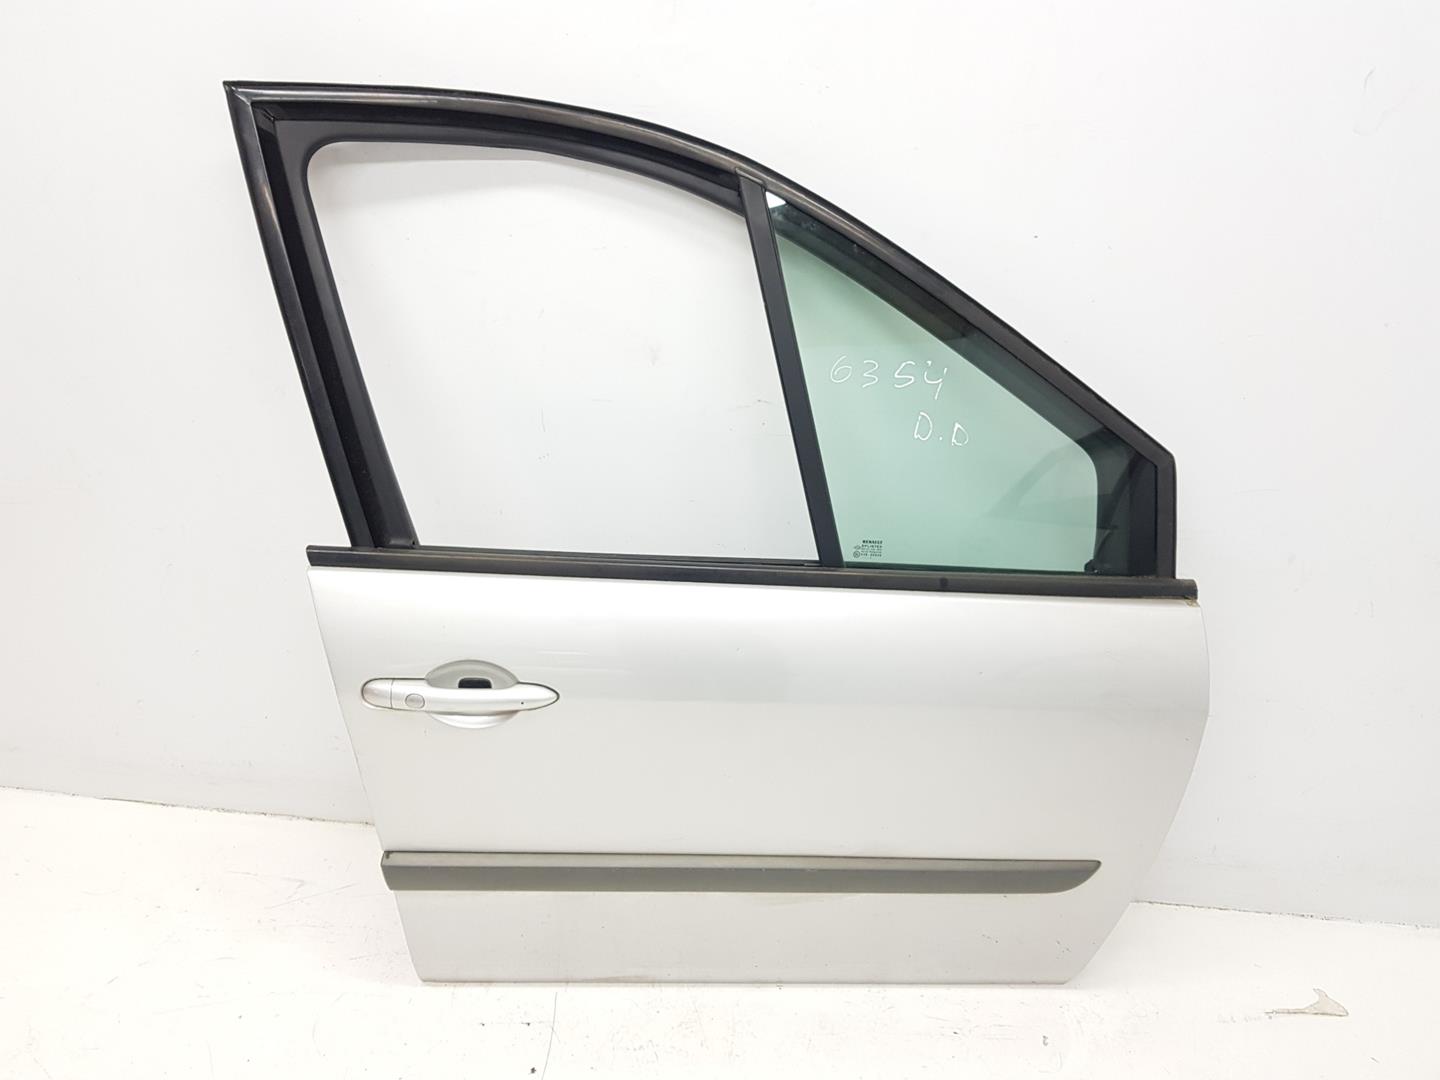 RENAULT Scenic 2 generation (2003-2010) Front Right Door 7751477220, 7751477220, GRISTED69 21079014